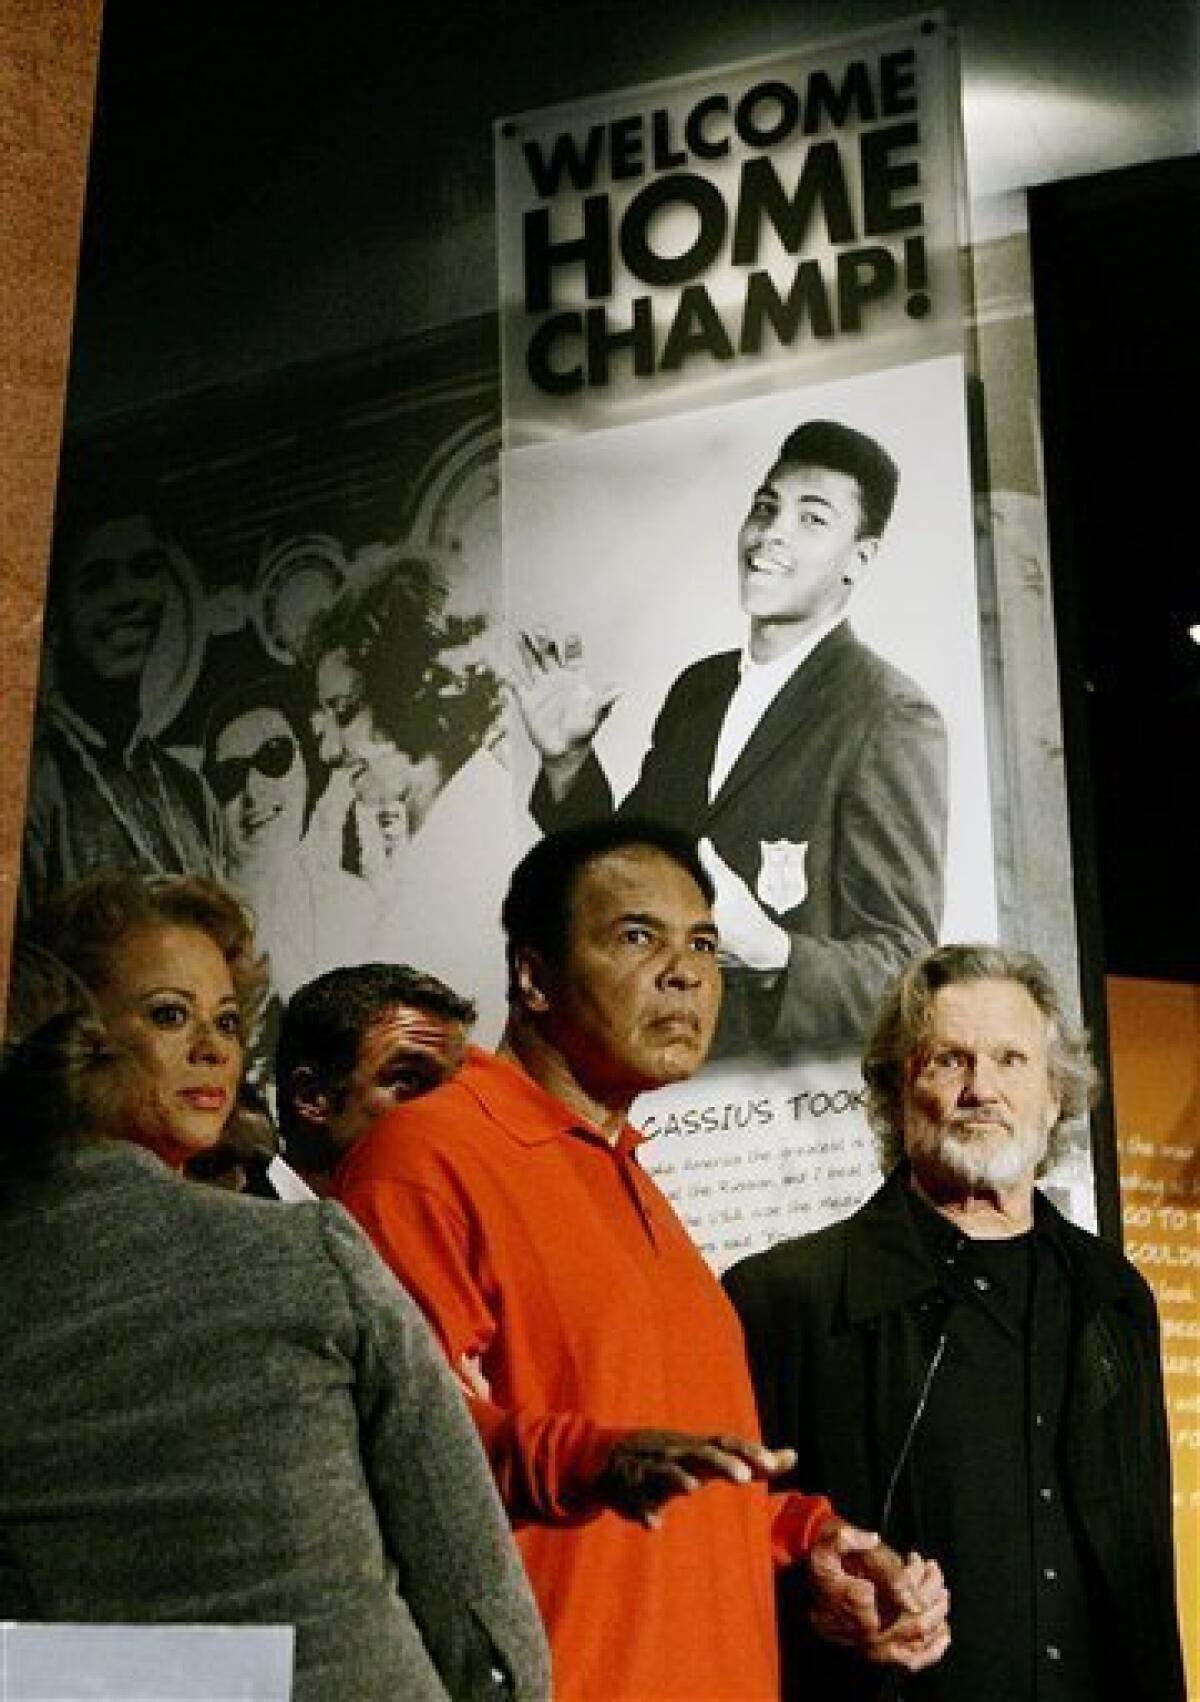 FILE - In this Nov. 18, 2005 file photo, boxing great Muhammad Ali is accompanied by his wife Lonnie and singer Kris Kristofferson as he tours the Muhammad Ali Center in Louisville, Ky. The man who became the world's most recognizable athlete was a baby sitter, a jokester and a dreamer in the predominantly black West End neighborhood of Louisville where he grew up and forged lasting friendships while beginning his ascent toward greatness. Now, as the iconic boxer slowed by Parkinson's disease prepares to turn 70 next week, he's coming home for a birthday bash at the downtown cultural center and museum that bears his name. (AP Photo/Ed Reinke, File)